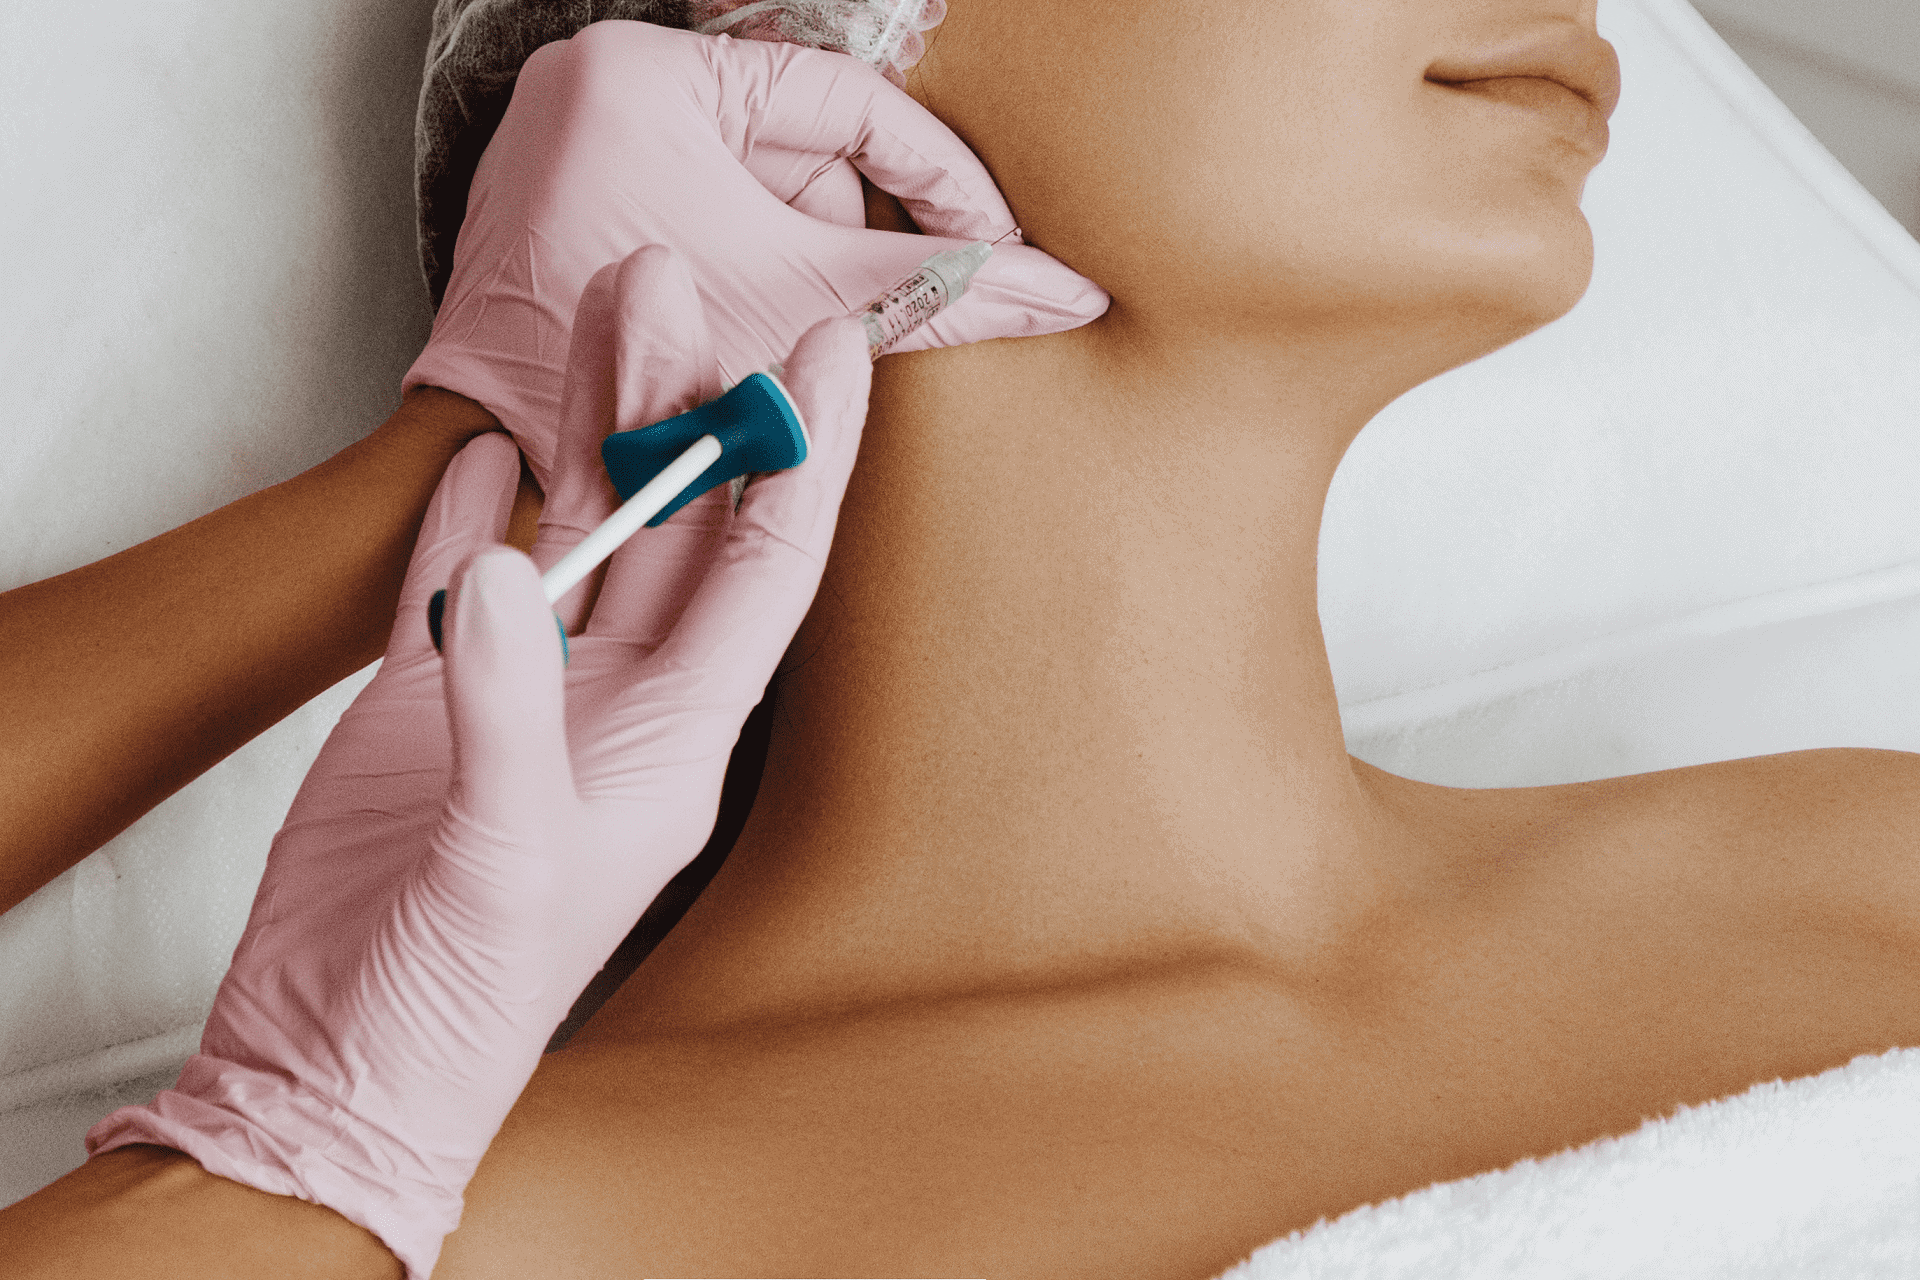 Juvederm in Glendale, Encino, and Irvine, CA | New Look Skin Center Medical Spa in Glendale, Encino and Irvine, CA